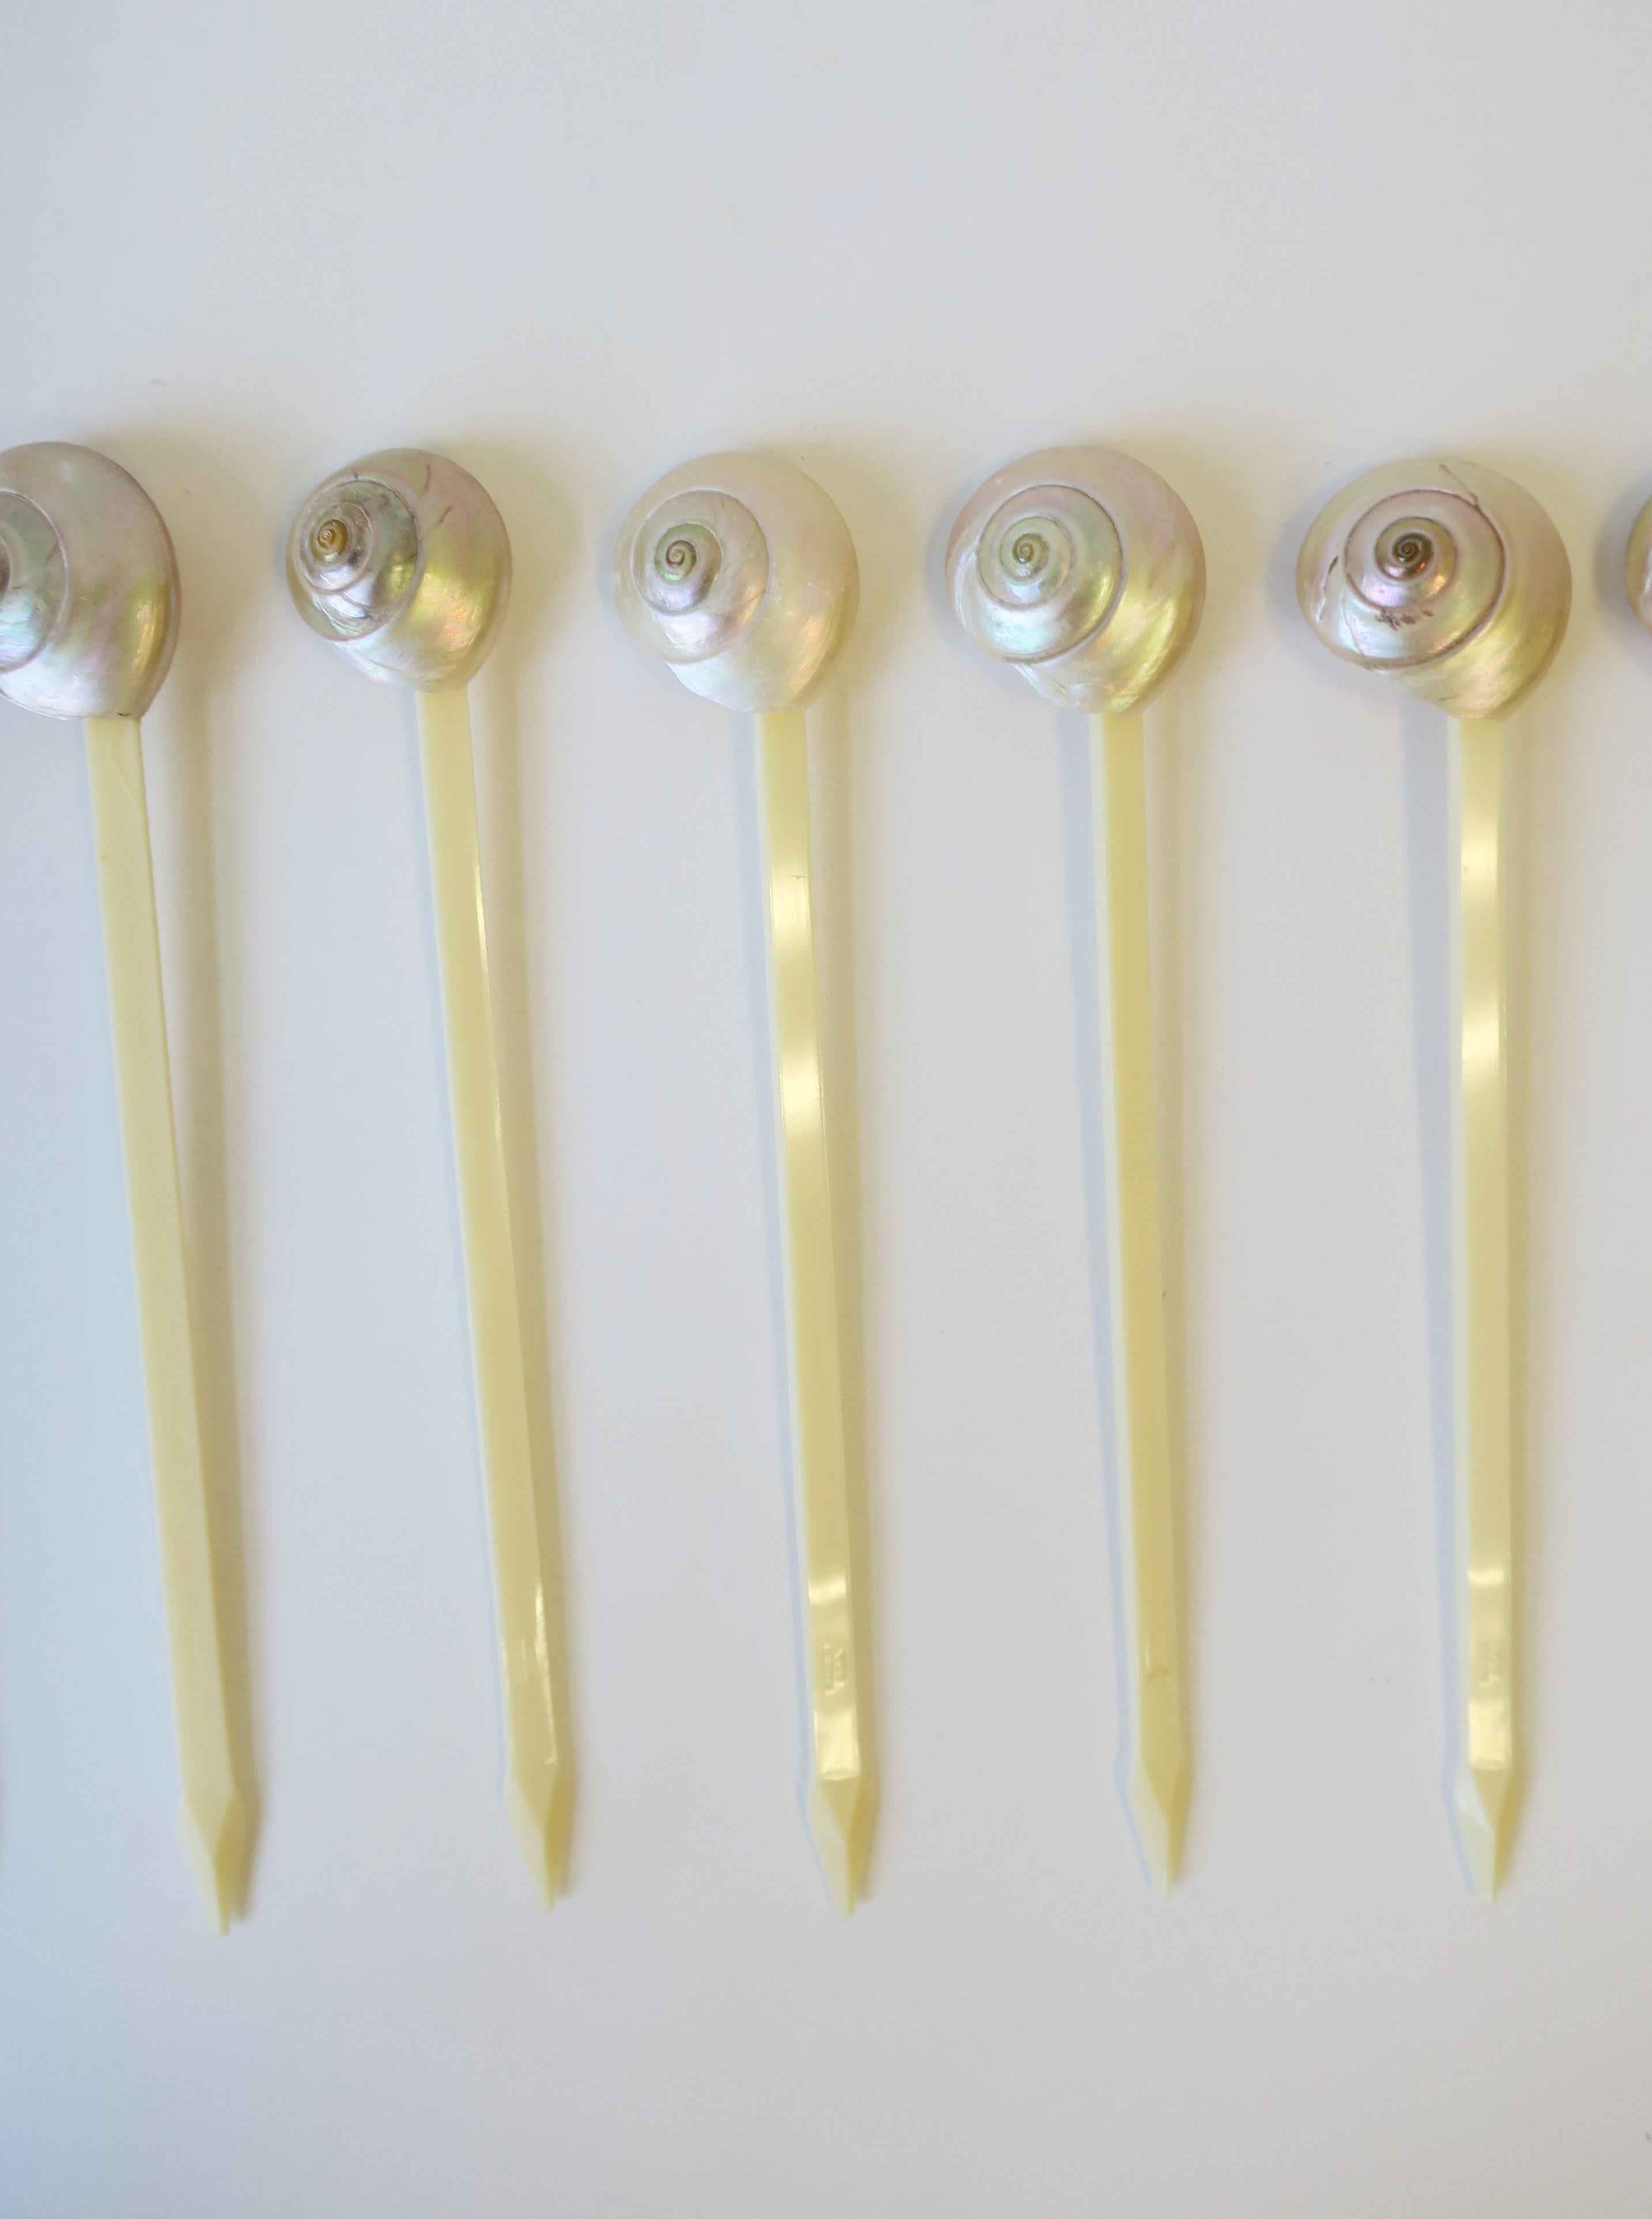 American Seashell Mother of Pearl Cocktail Stirrers or Barware Picks, Set of 15